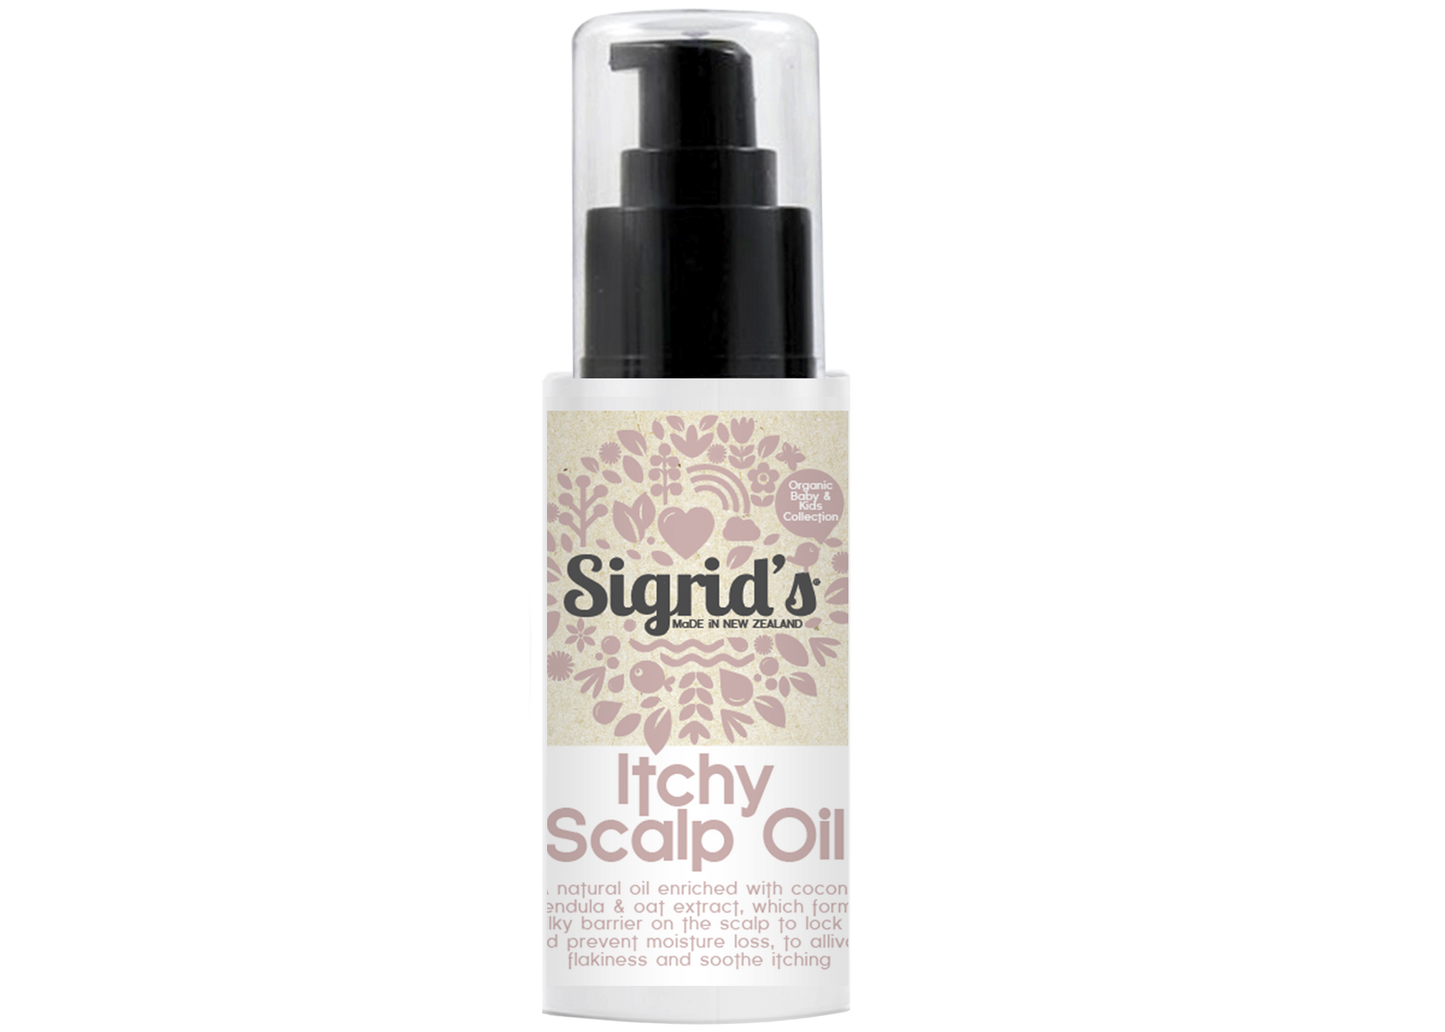 Natural Itchy Scalp Oil, with organic extracts